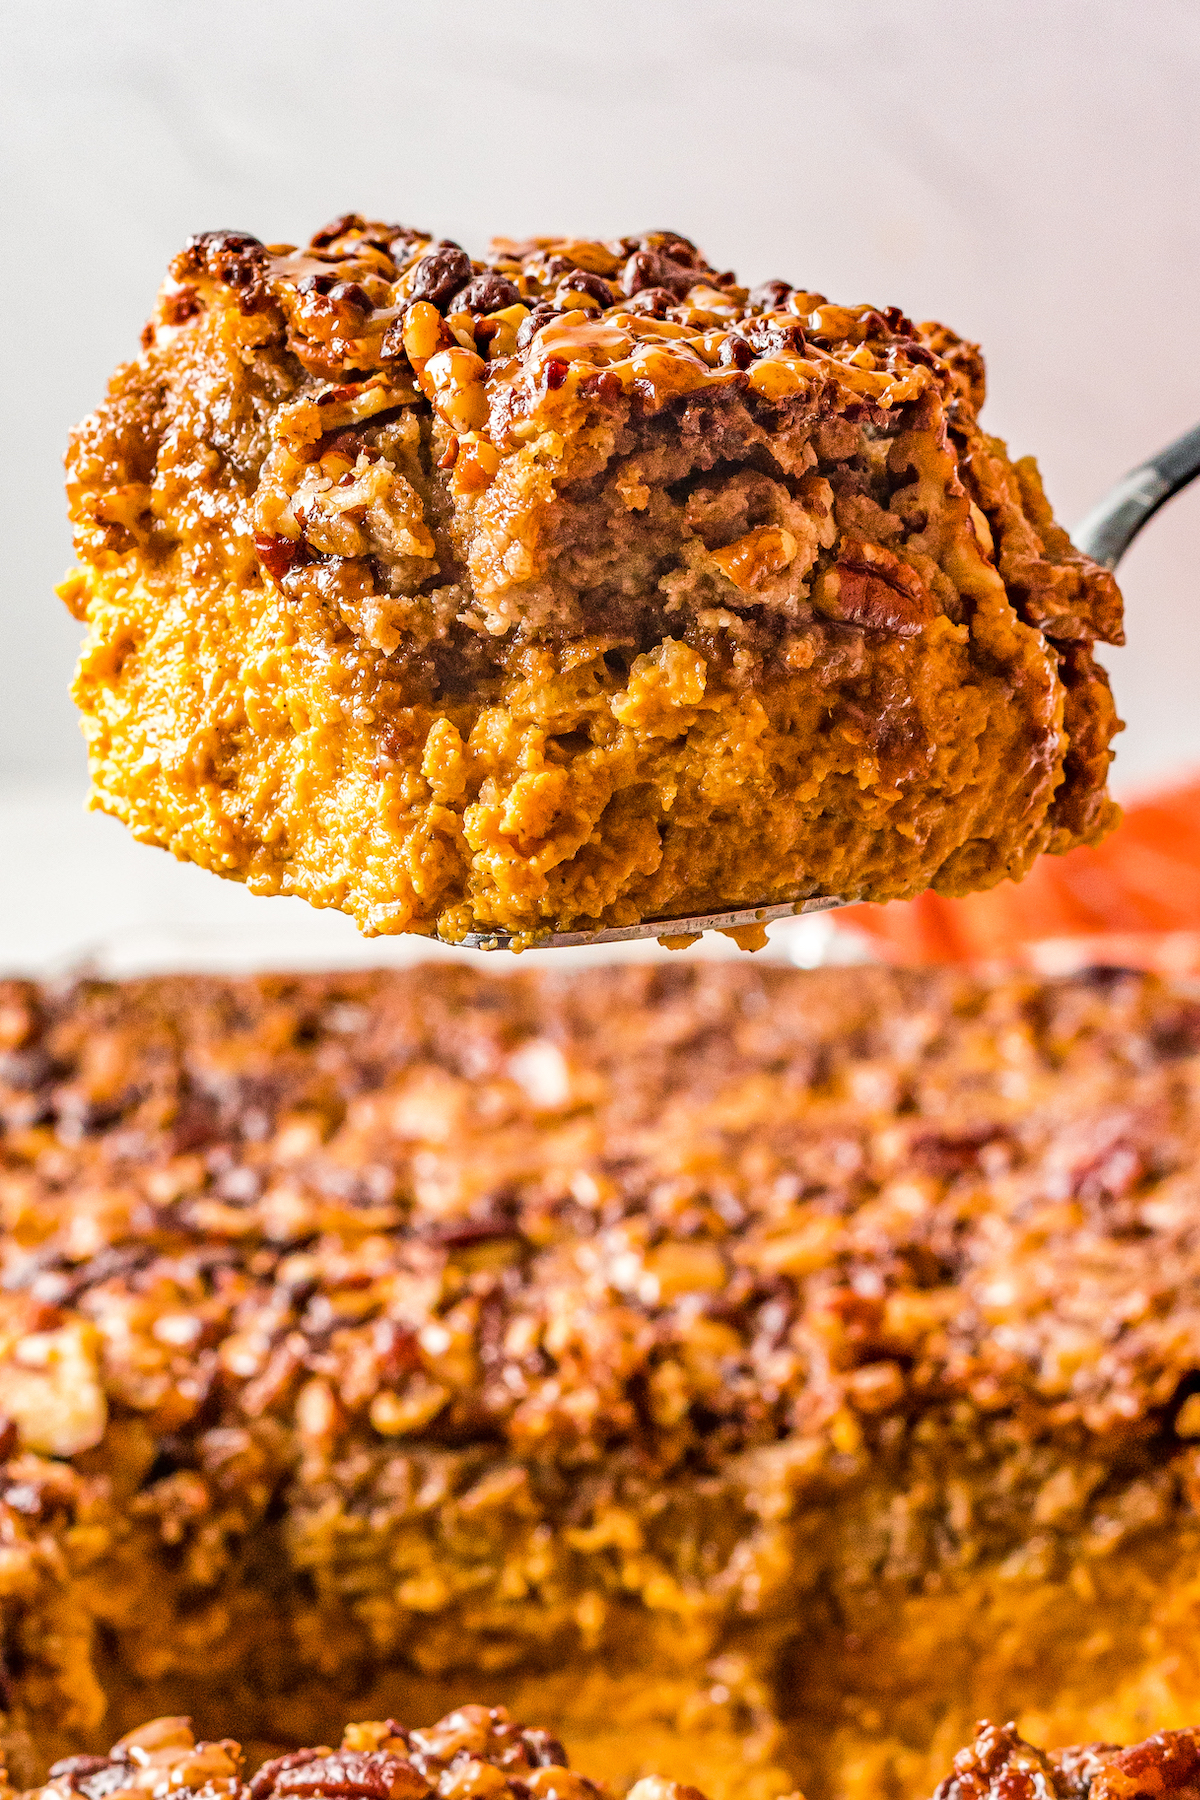 Close-up shot of a square of pumpkin dessert being held up to the camera on a cake server. The layers of pumpkin and crunchy topping are clearly defined.